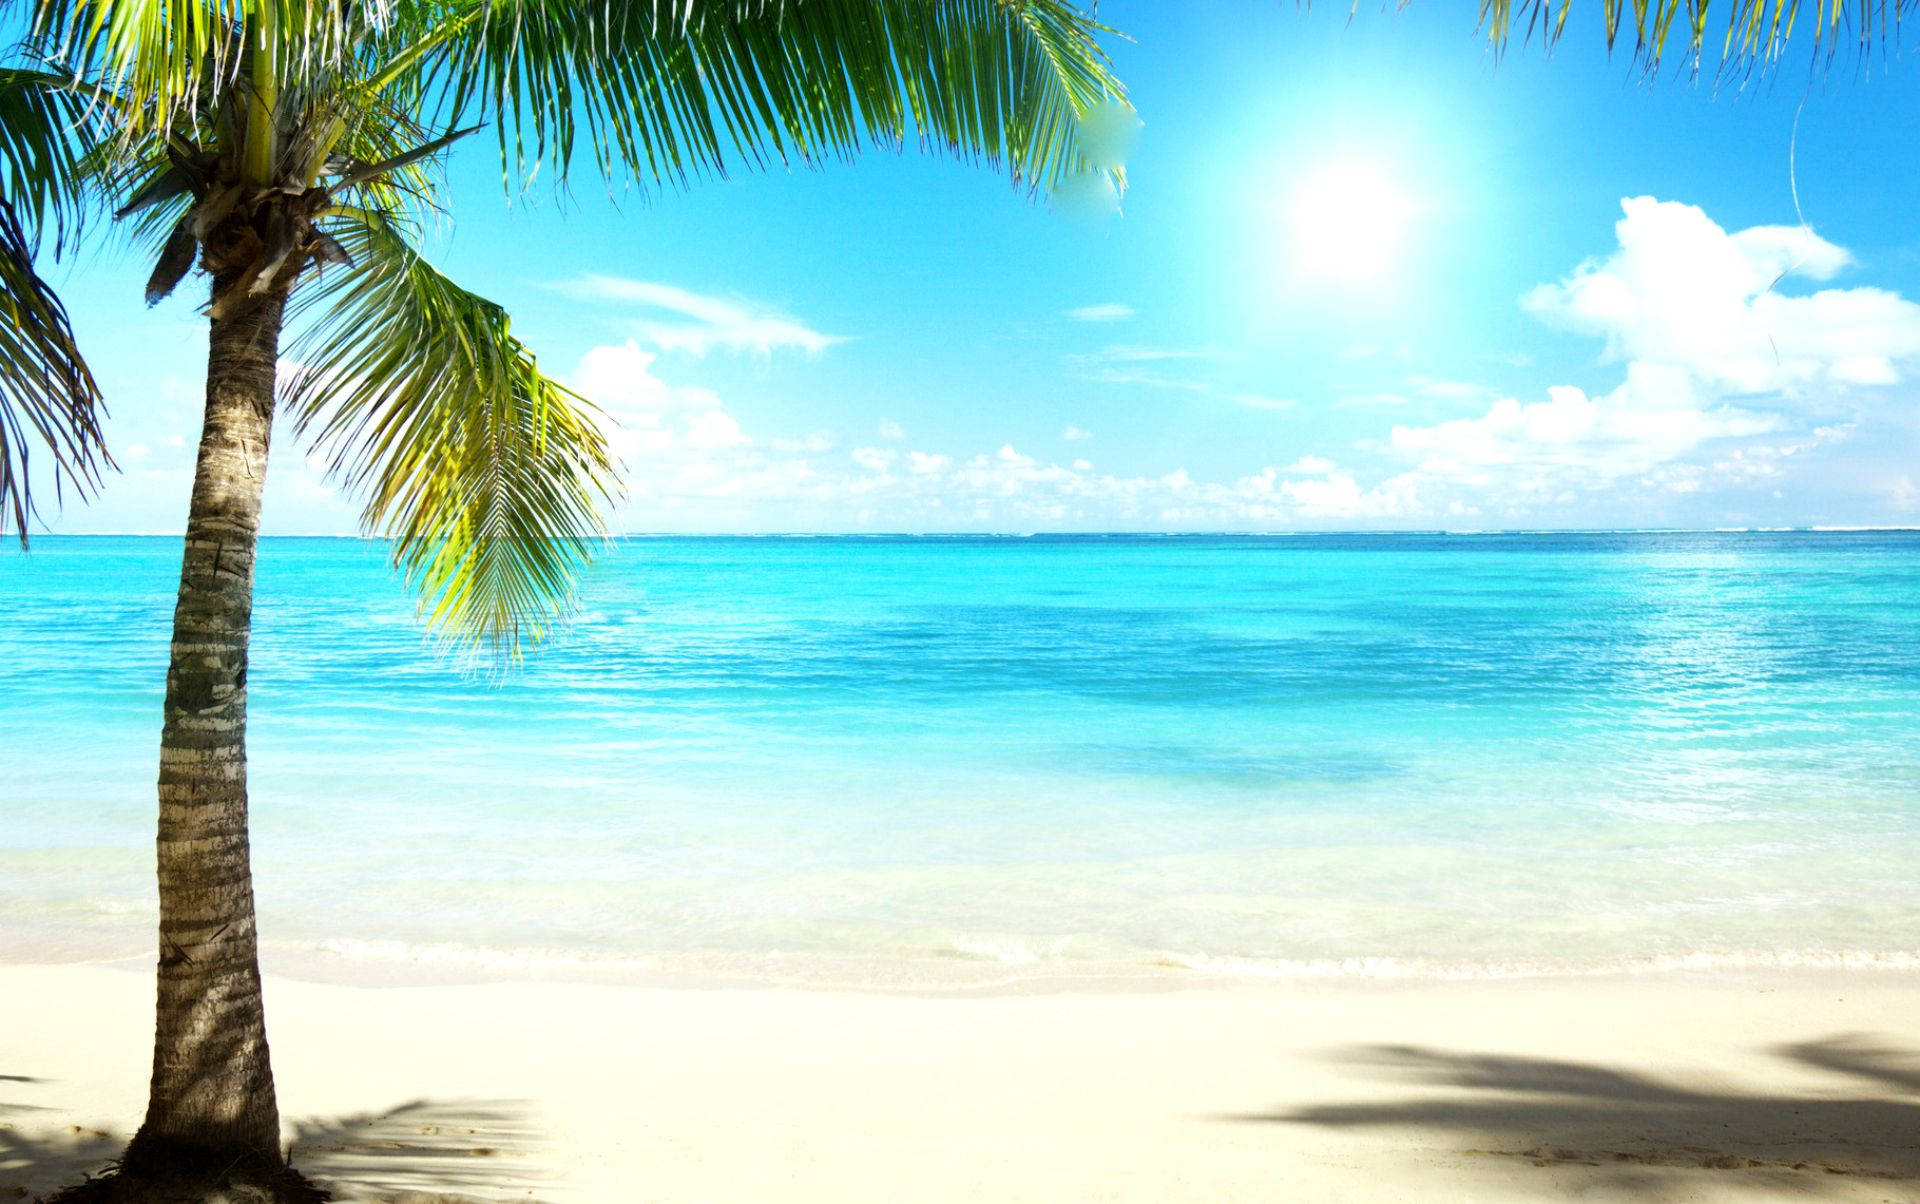 4k Beach With Coconut Tree Background